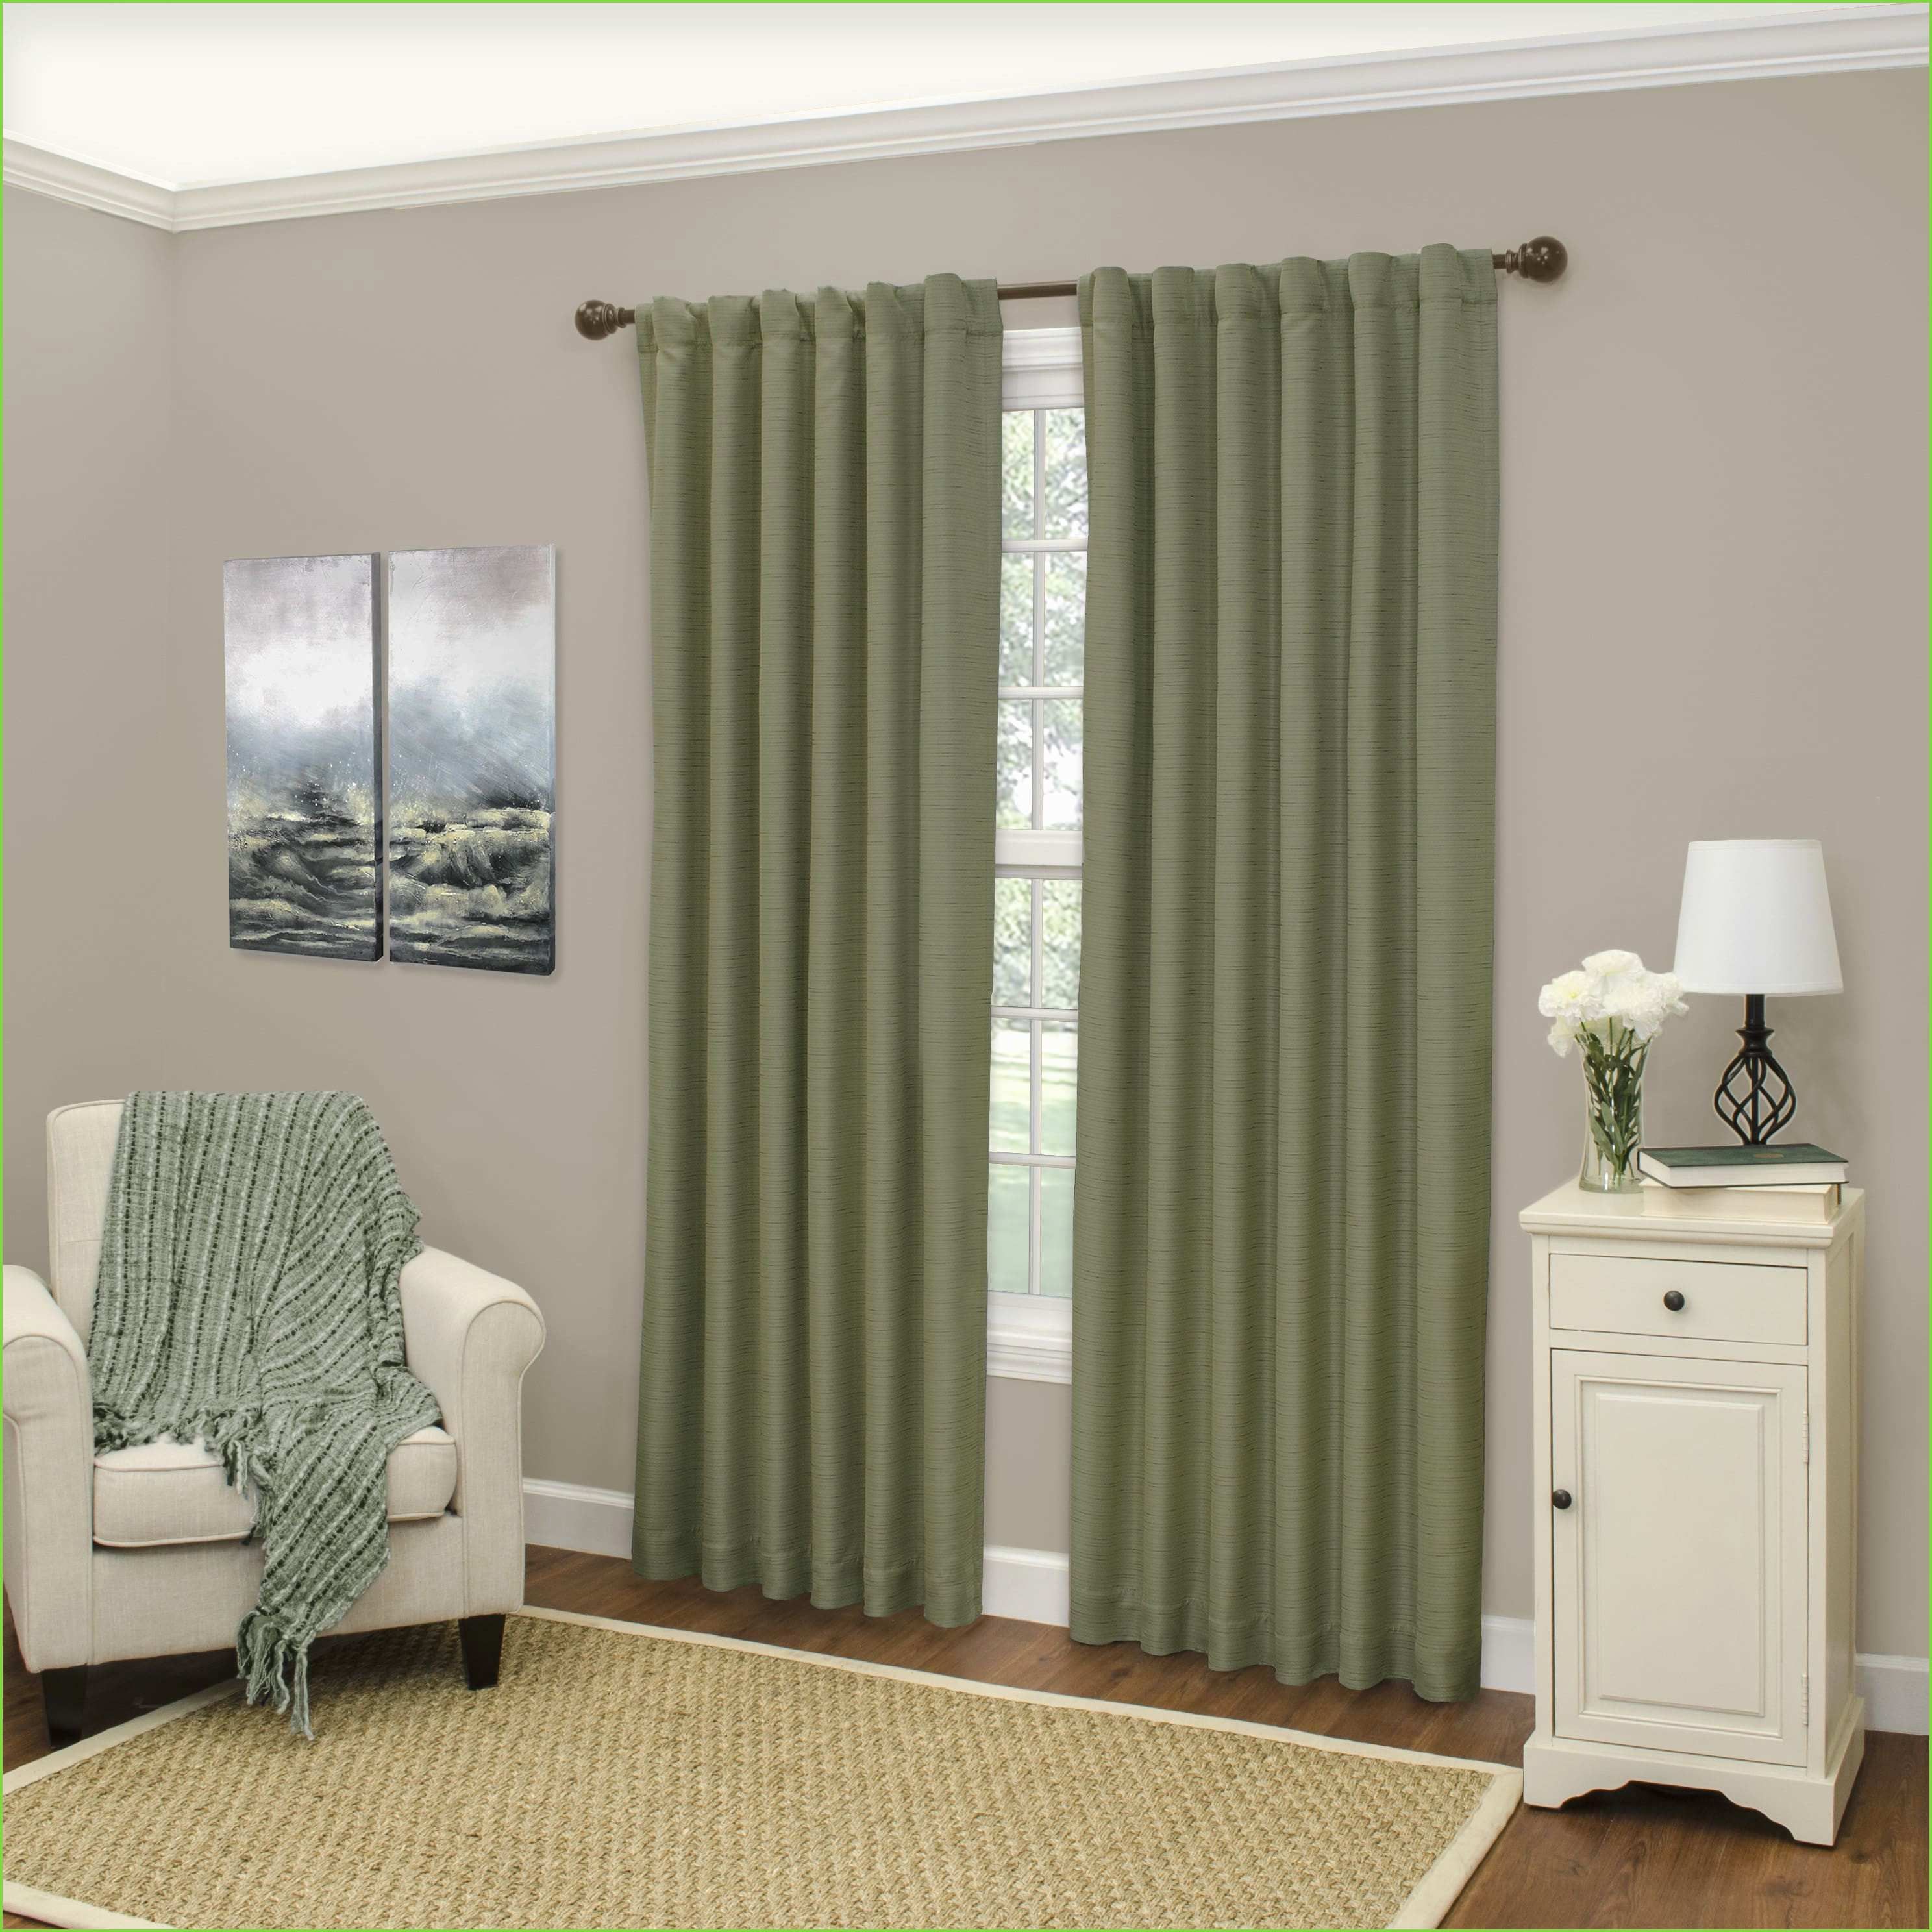 New Release Figure Of Eclipse Blackout Curtains Walmart Regarding Thermaweave Blackout Curtains (View 17 of 30)